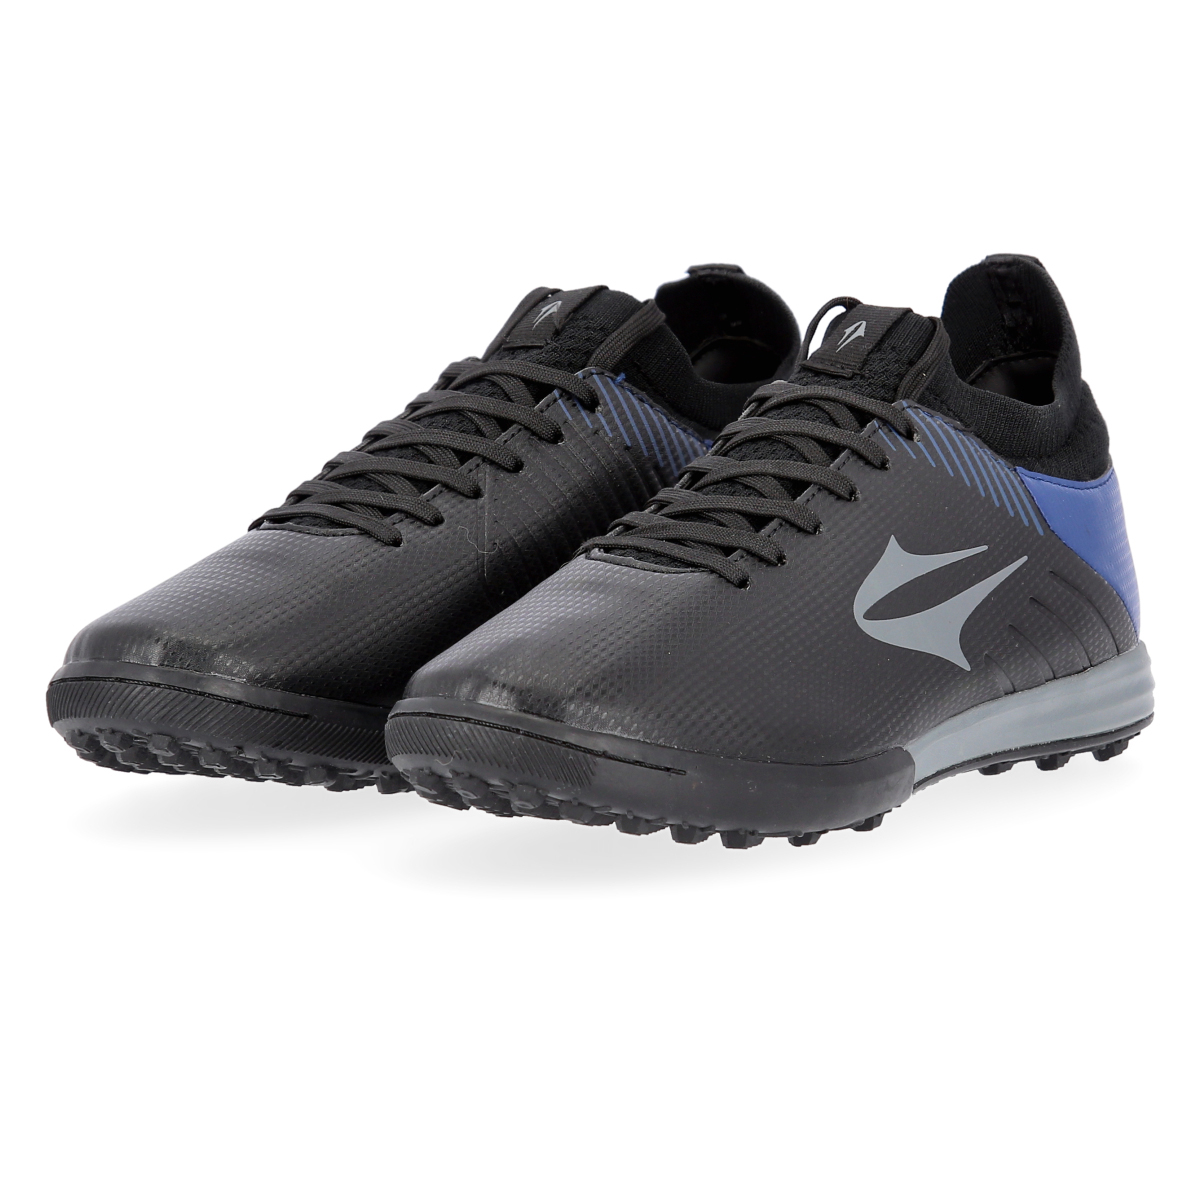 Botines Fútbol Topper Stingray Ii Mach 5 Tf Hombre,  image number null